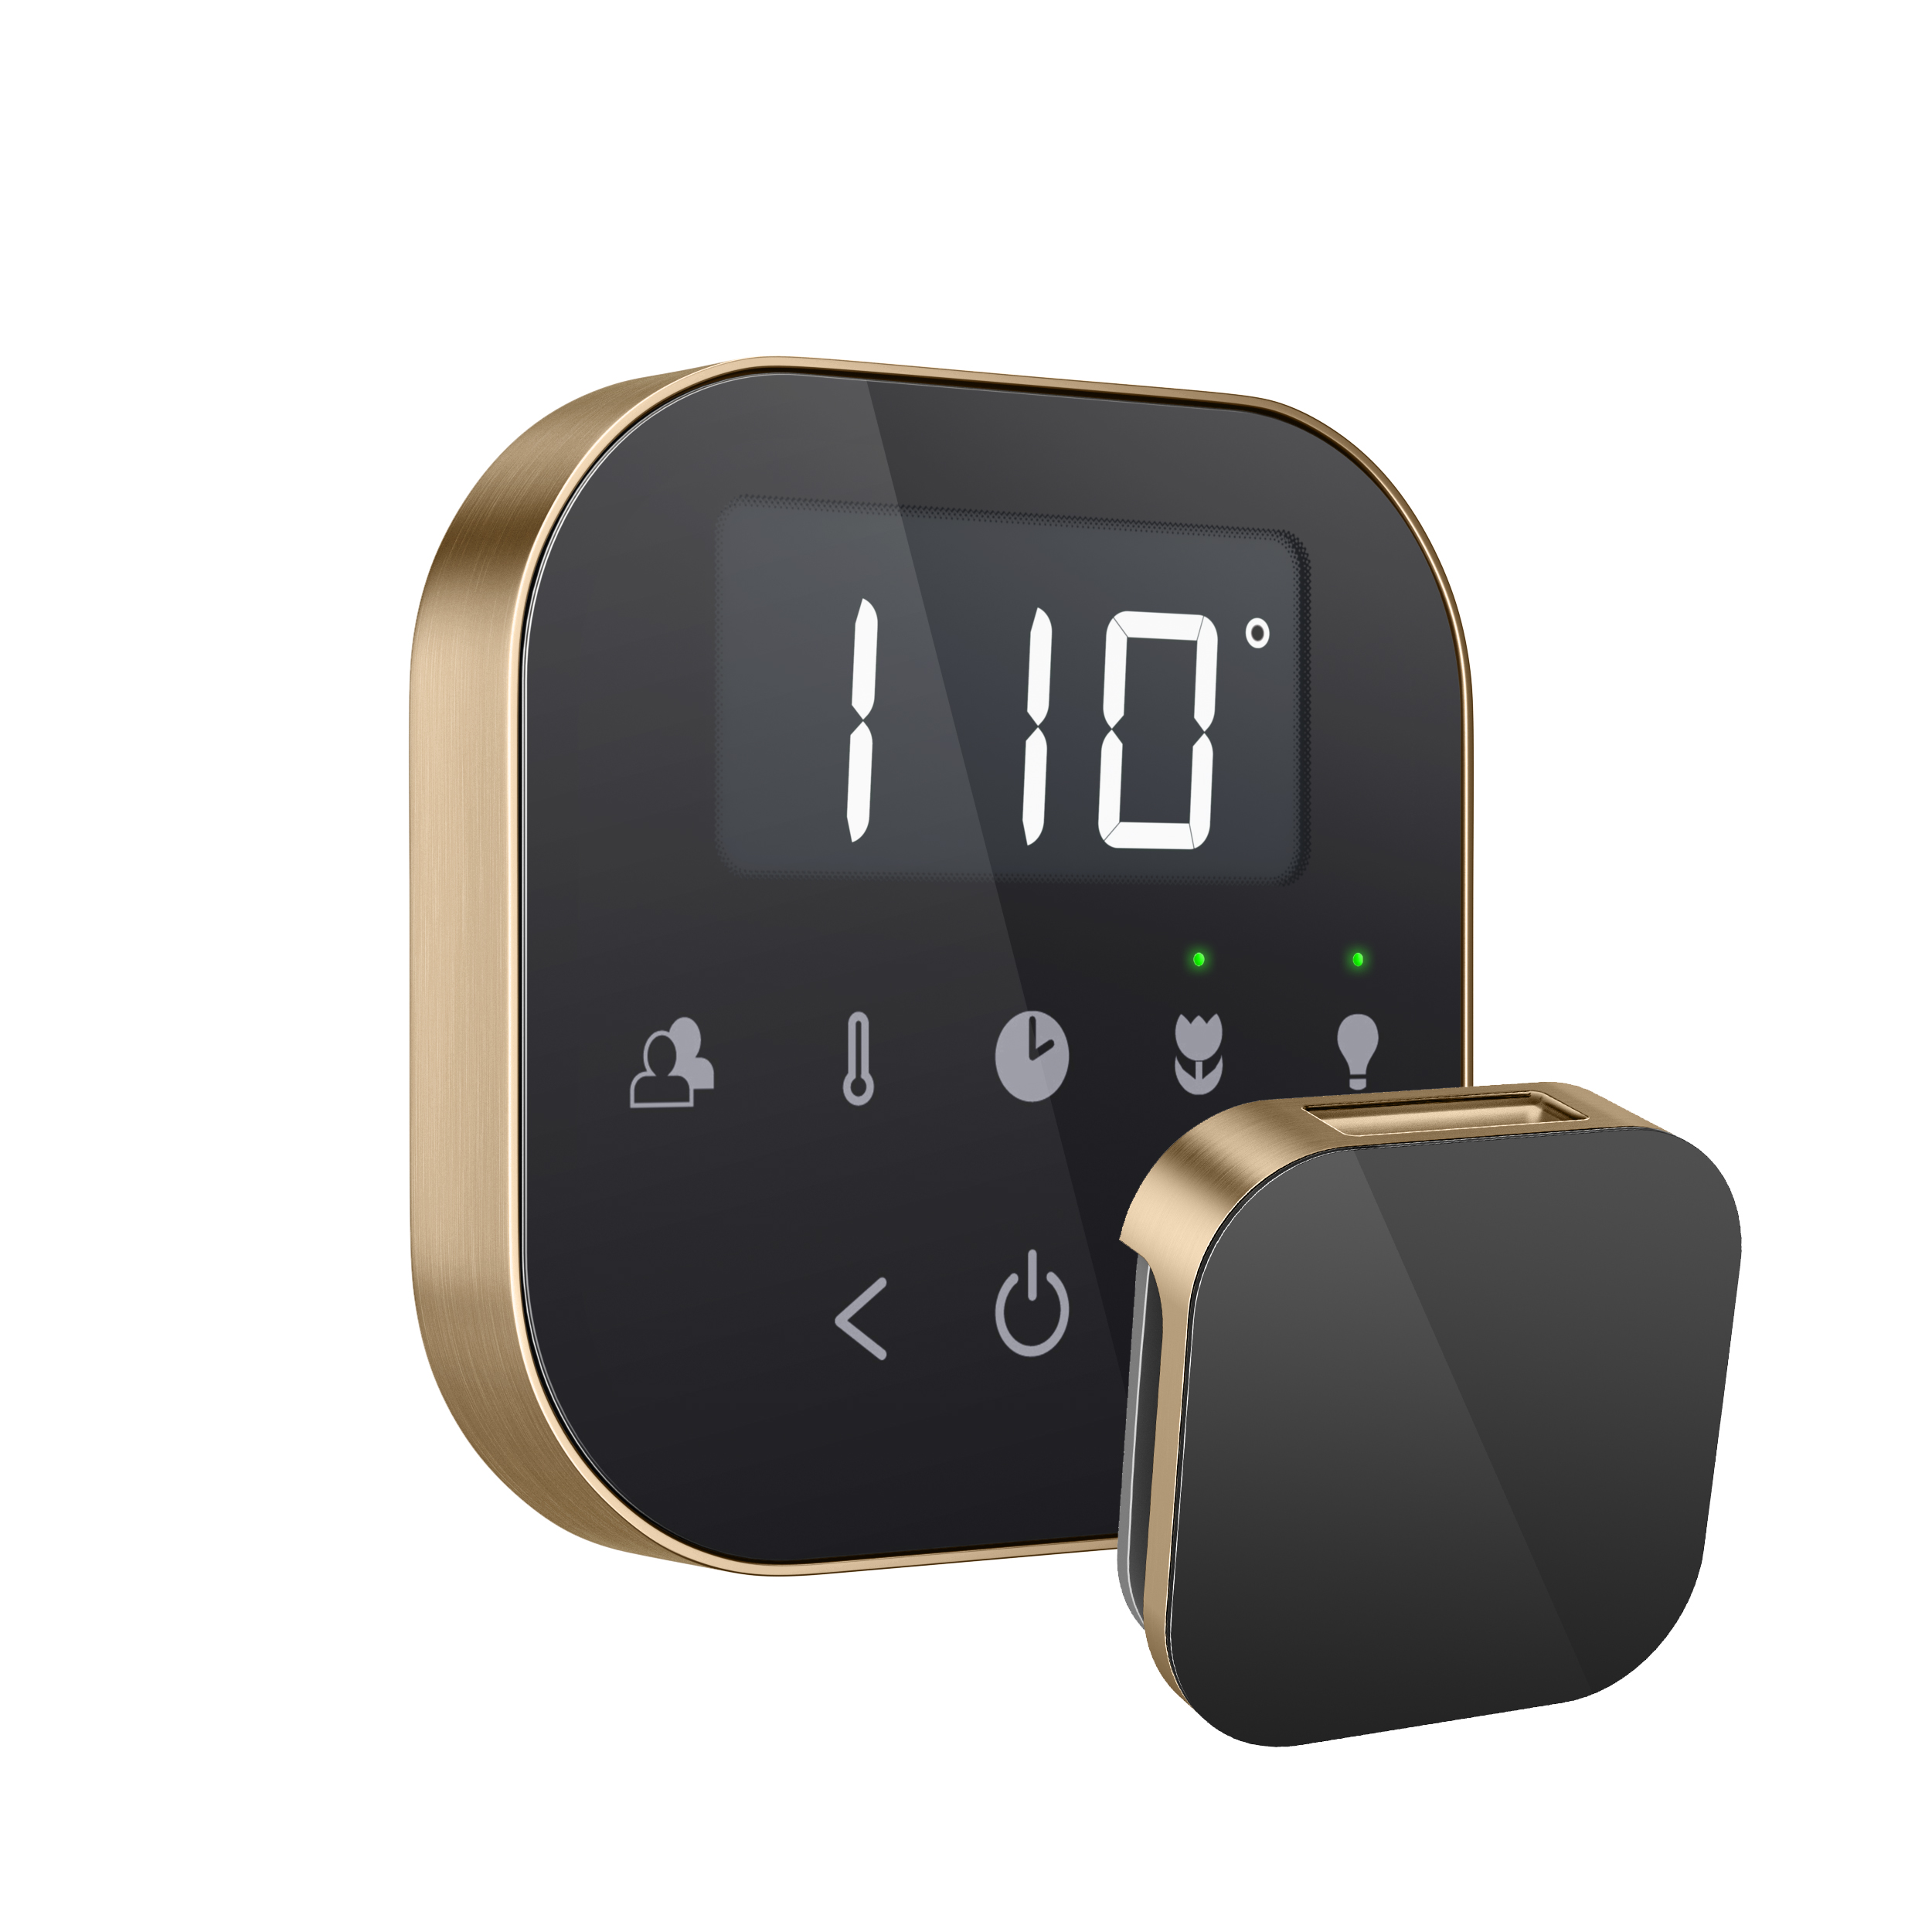 Mr Steam AIRTBK-BB AirTempo Steam Shower Control in Black with Brushed Bronze Bezel